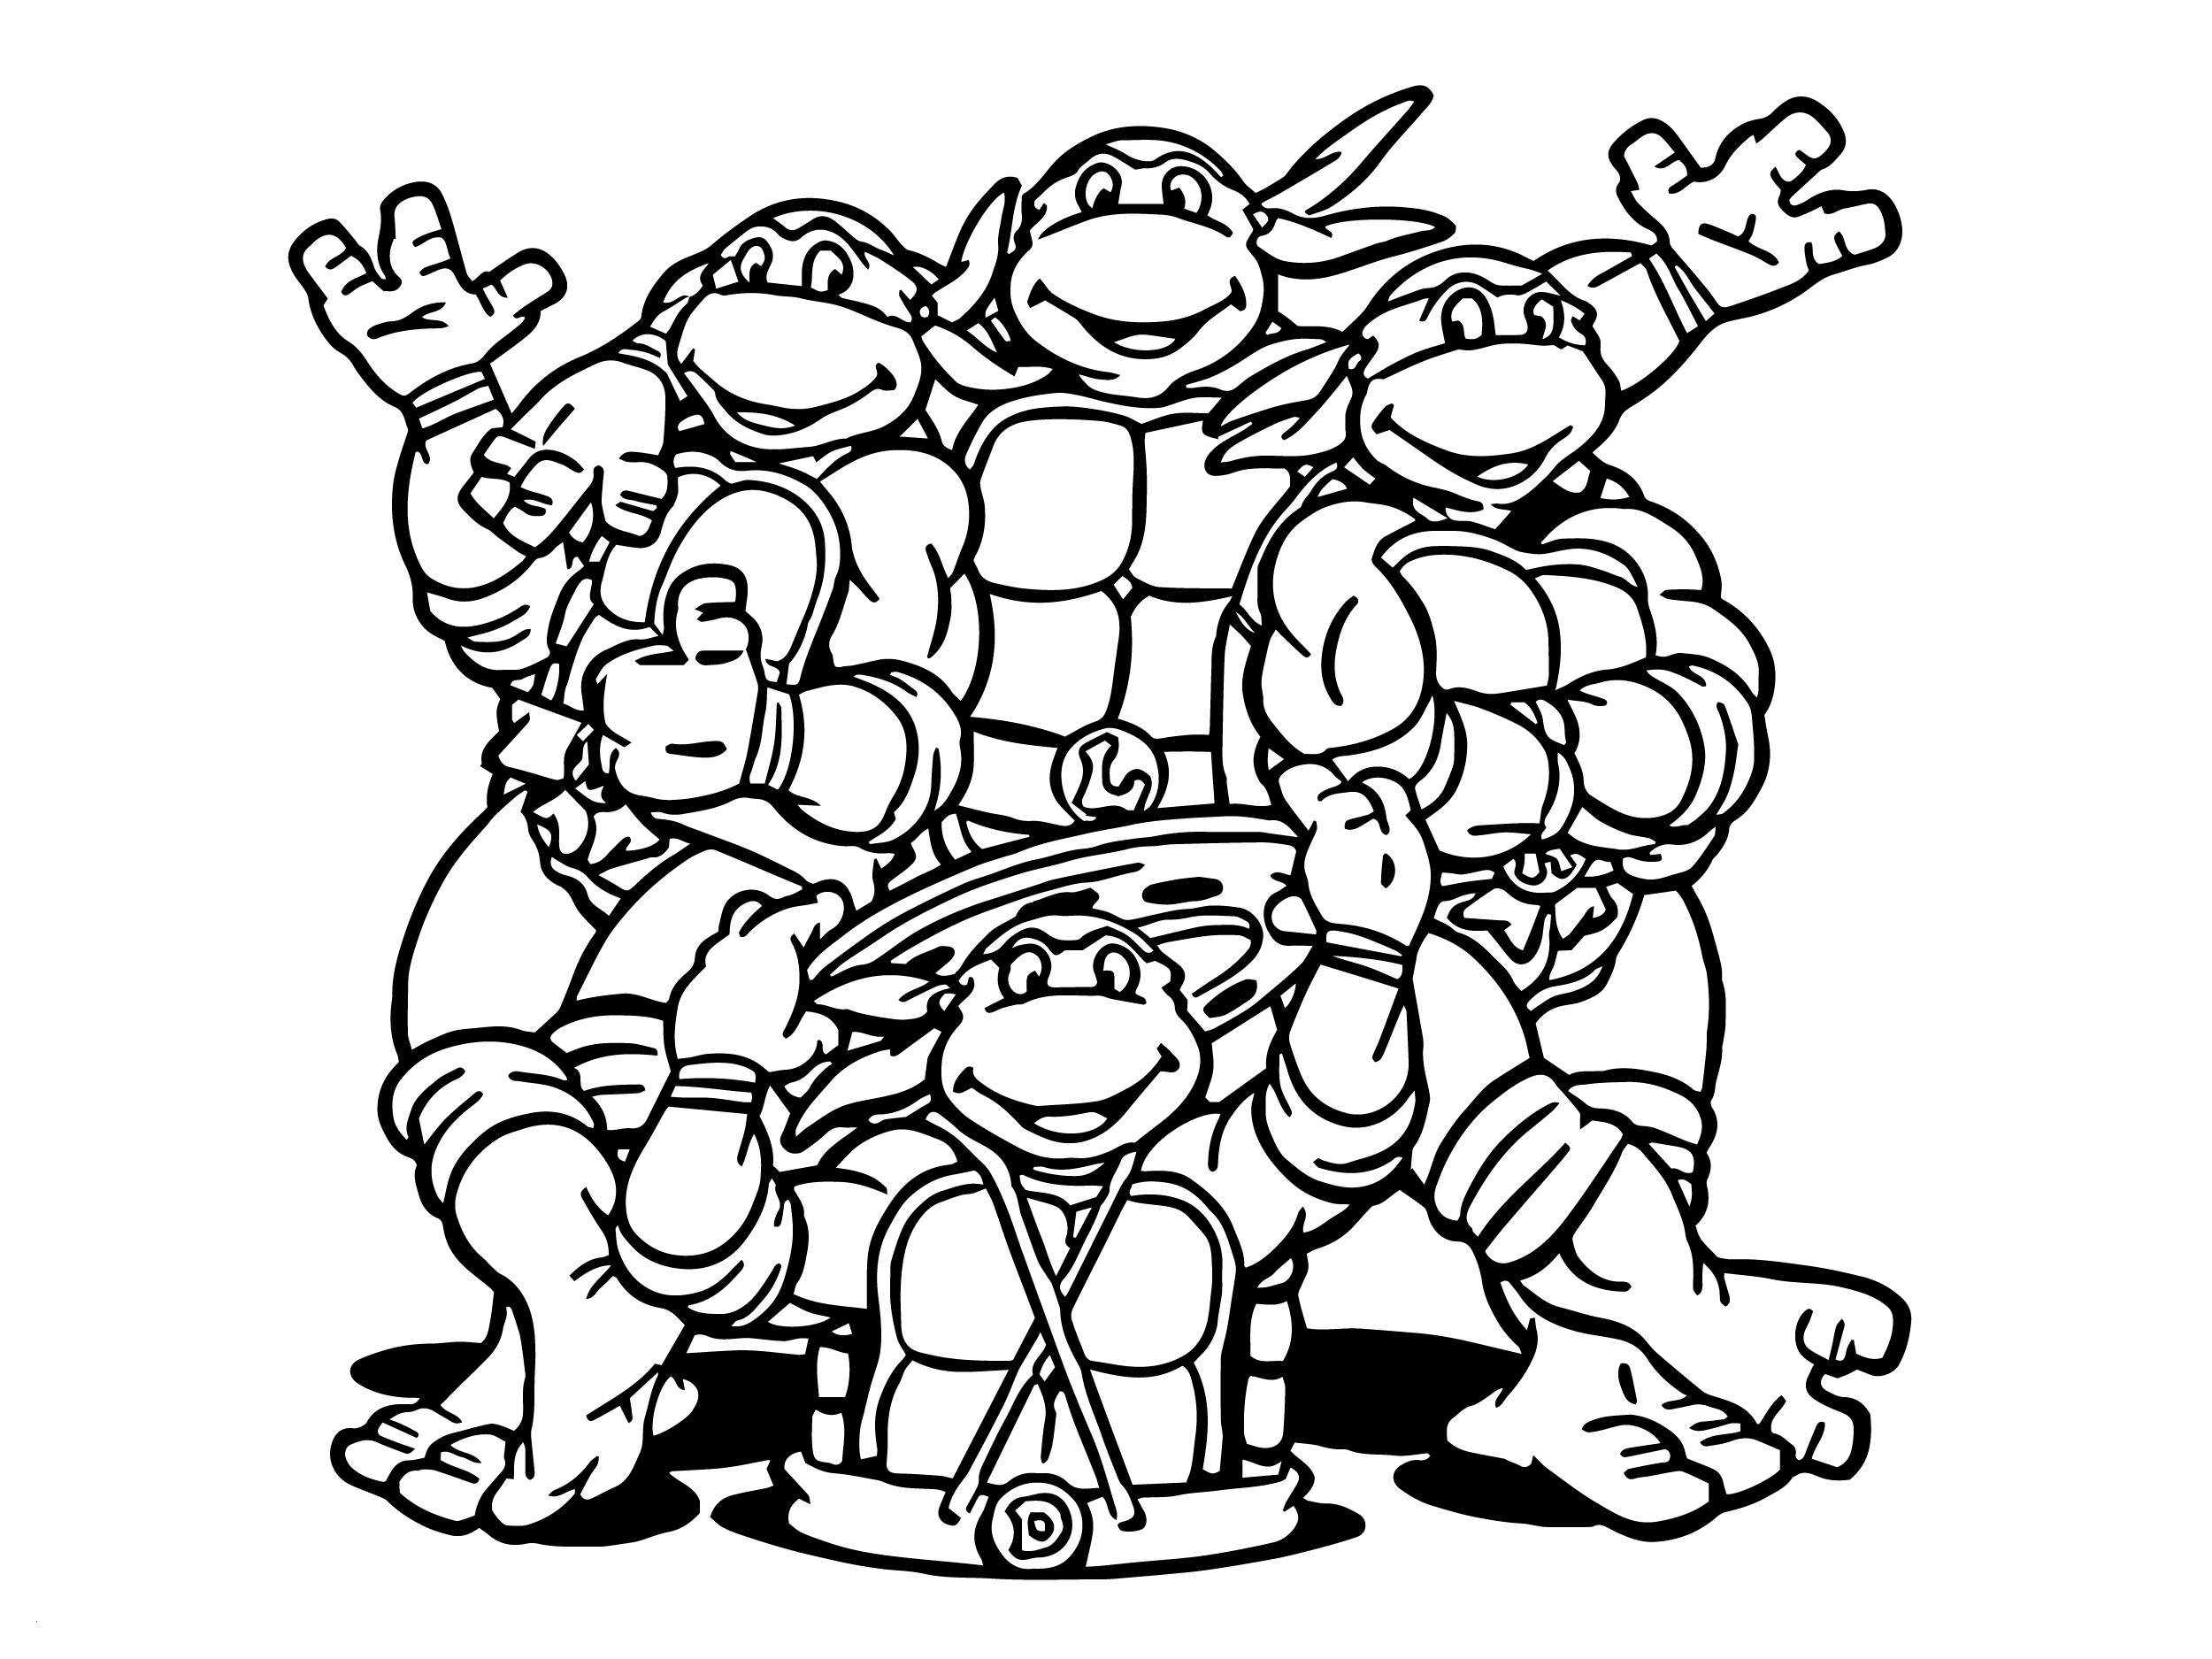 Teenage Mutant Ninja Turtles Coloring Pages Best Coloring Pages For Kids